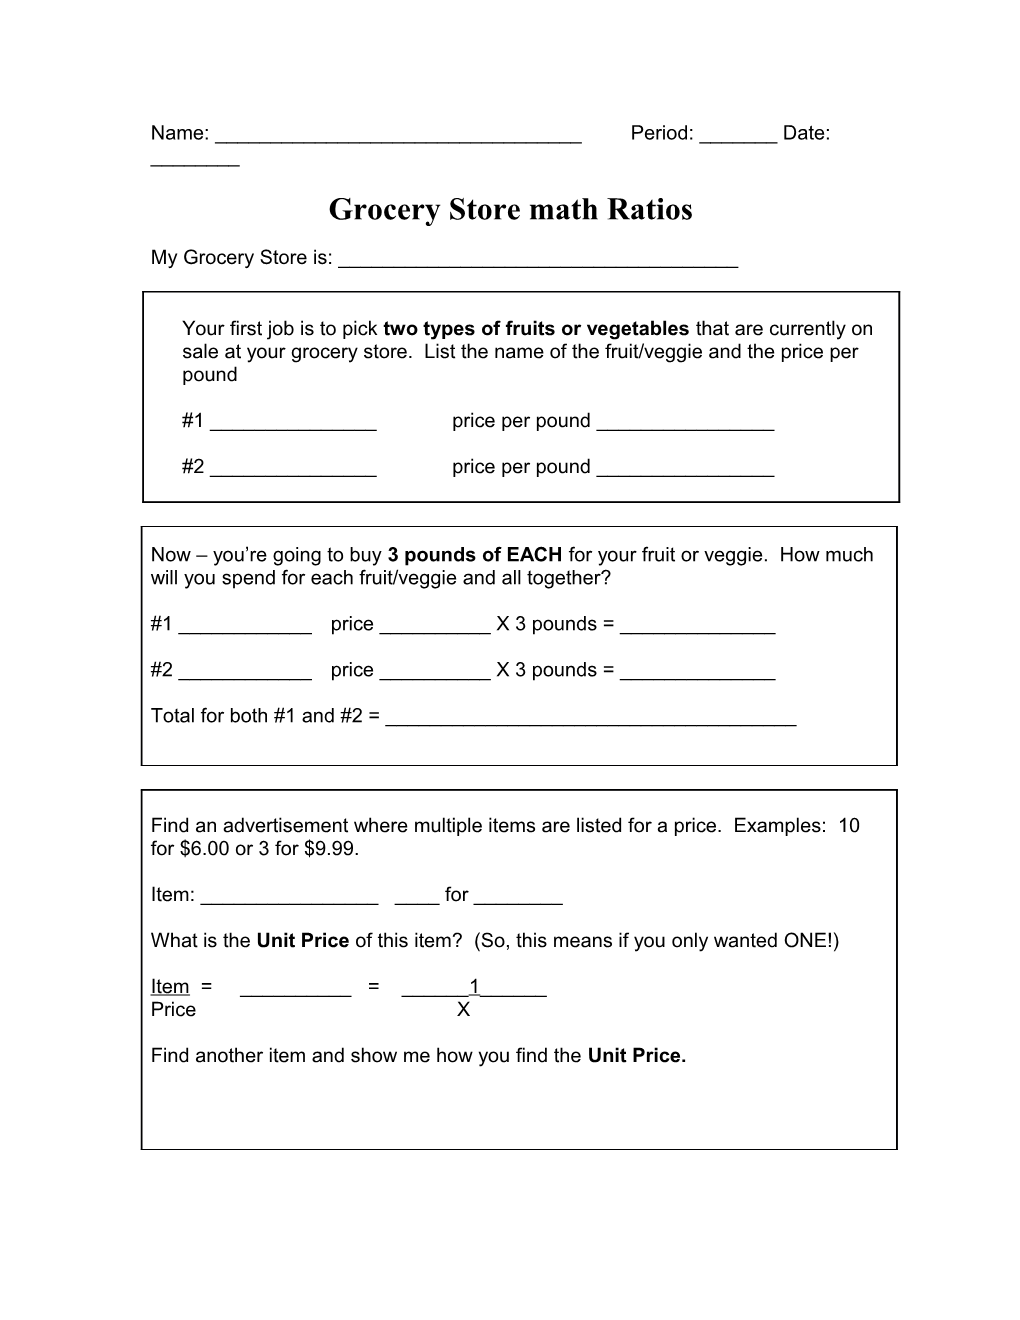 Grocery Store Math Ratios